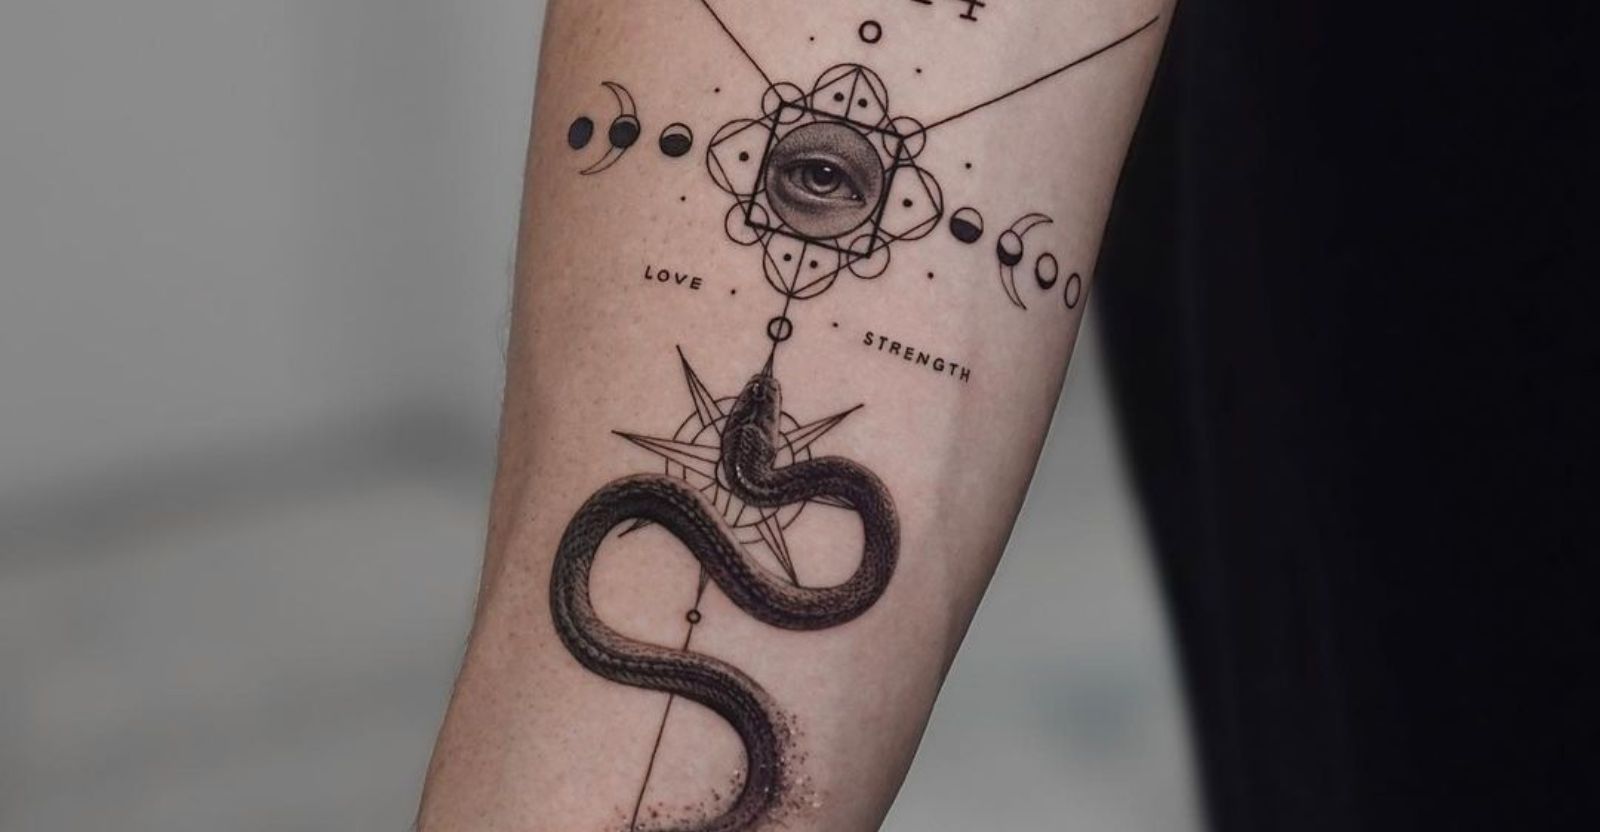 30+ Unique Arm Tattoo Ideas that are Simple Yet Have Meaning – MyBodiArt